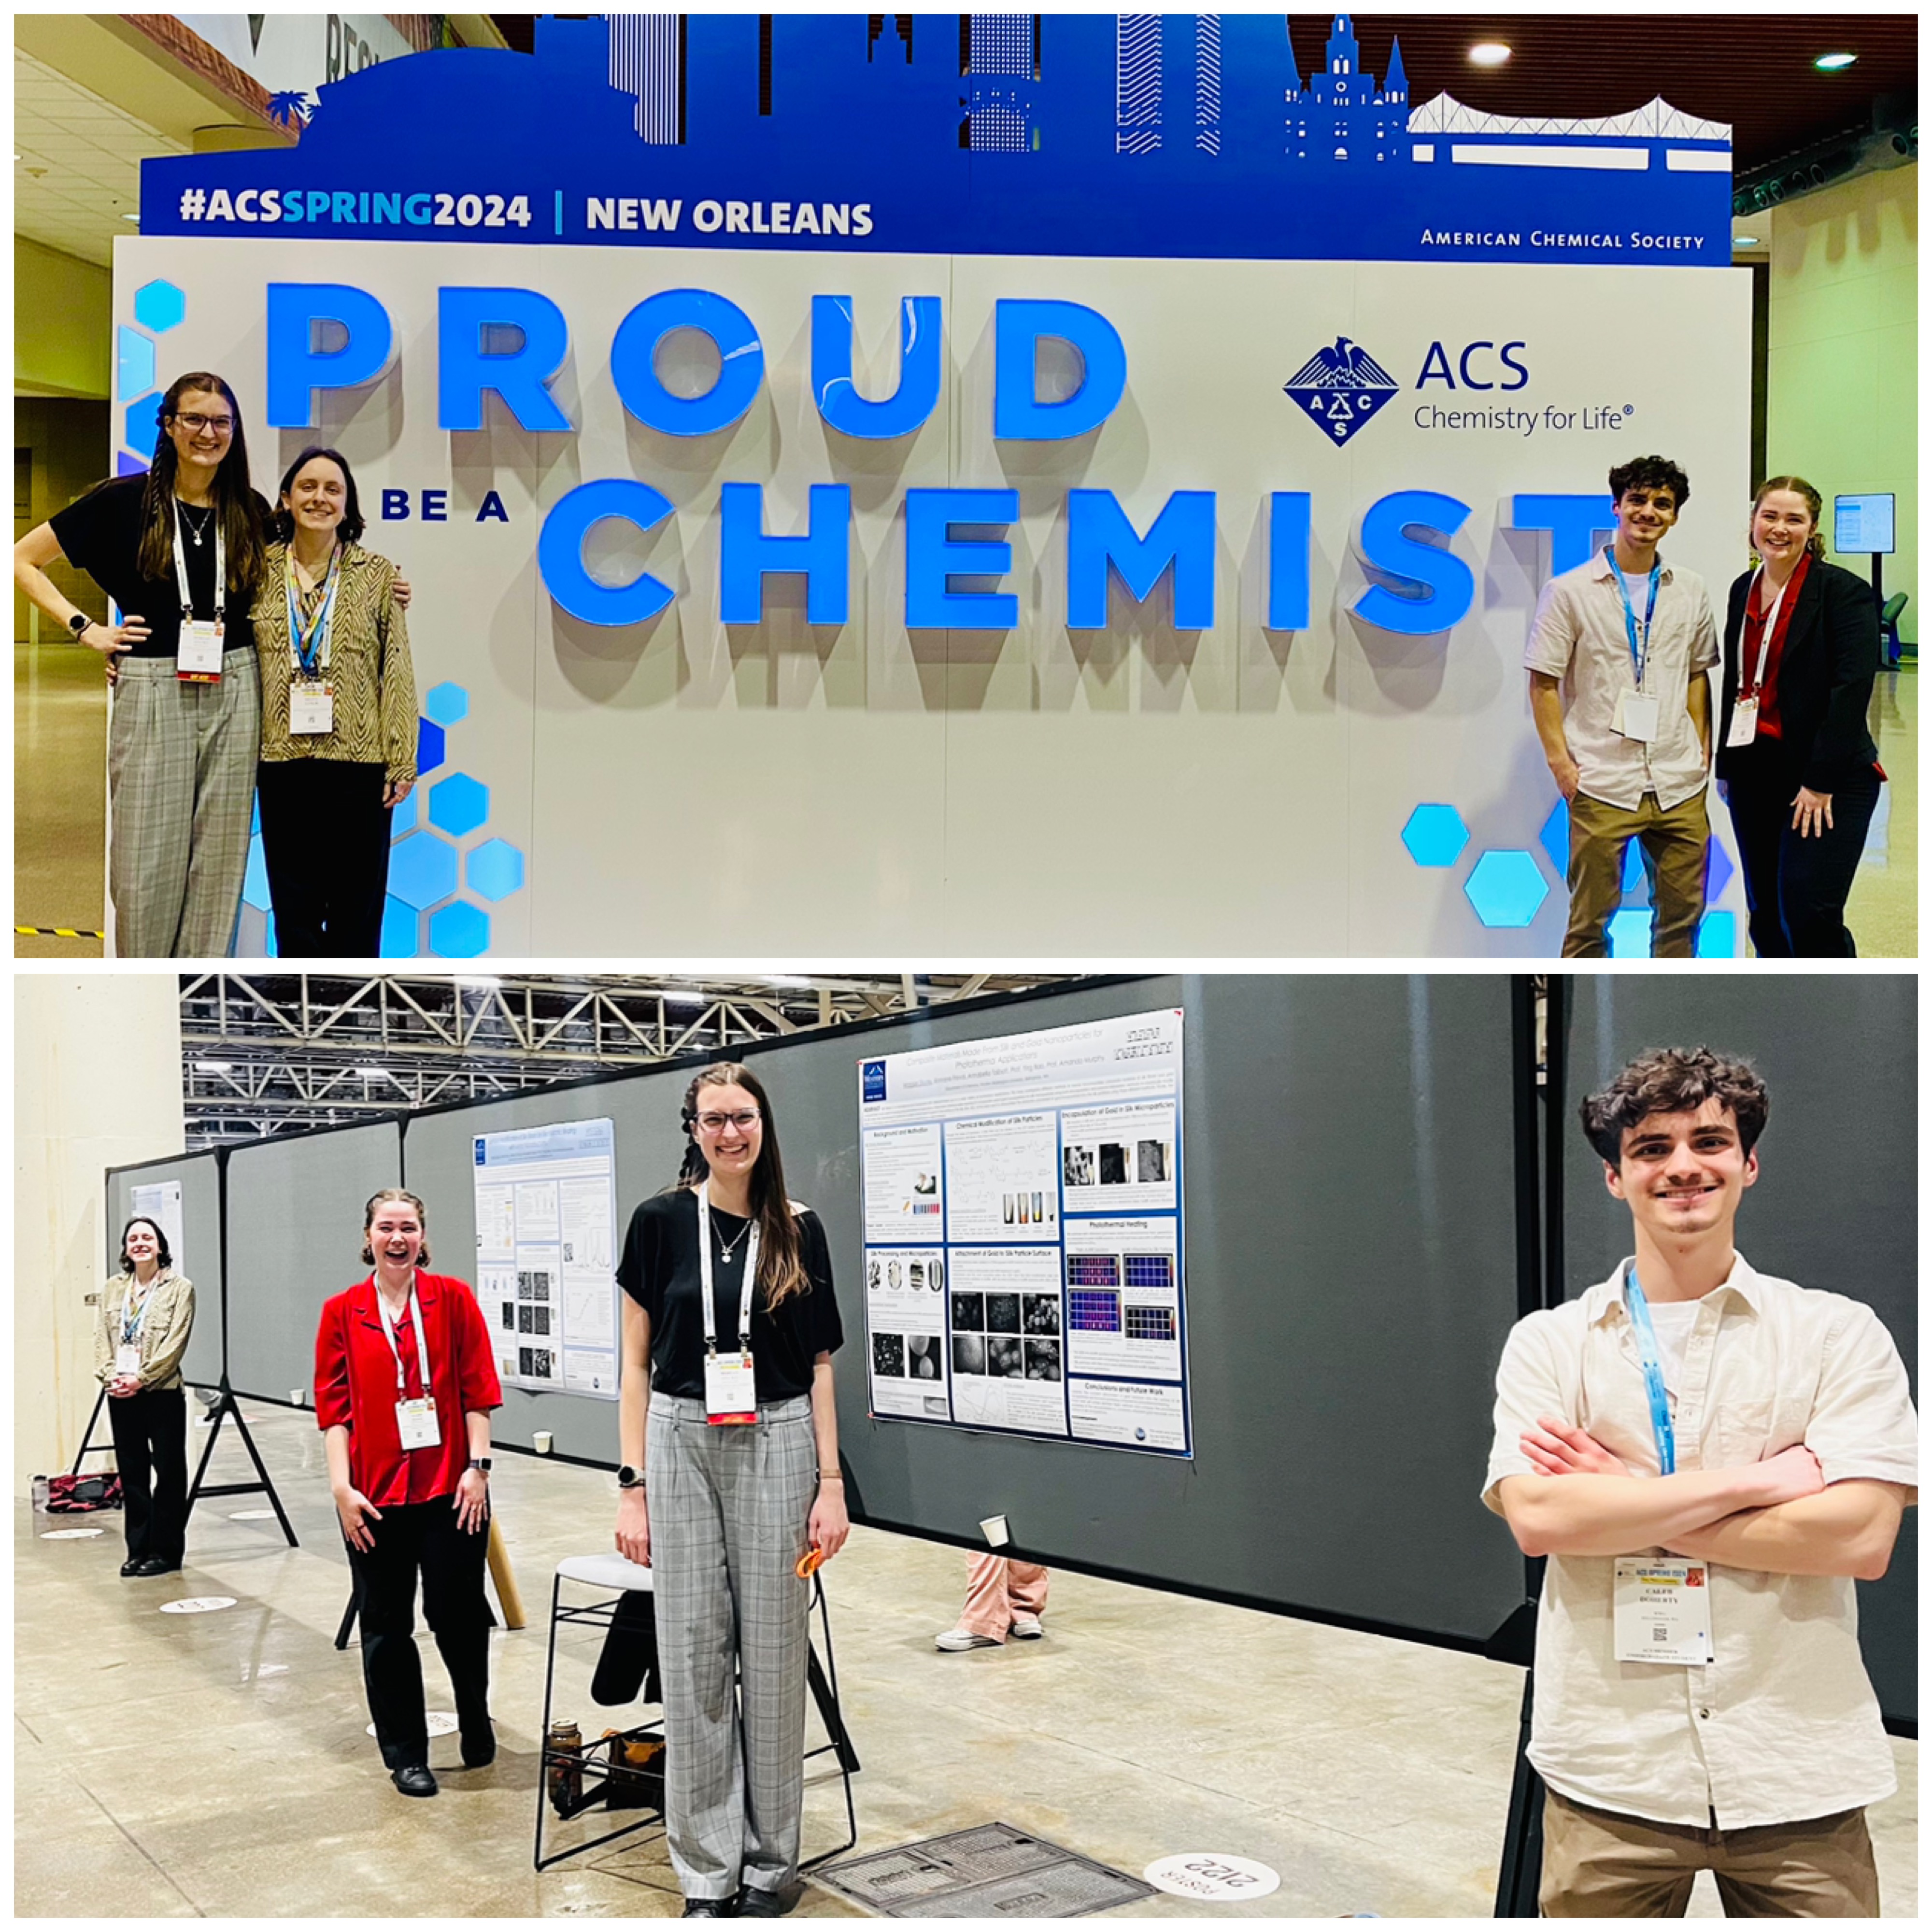 Students at ACS Meeting in New Orleans